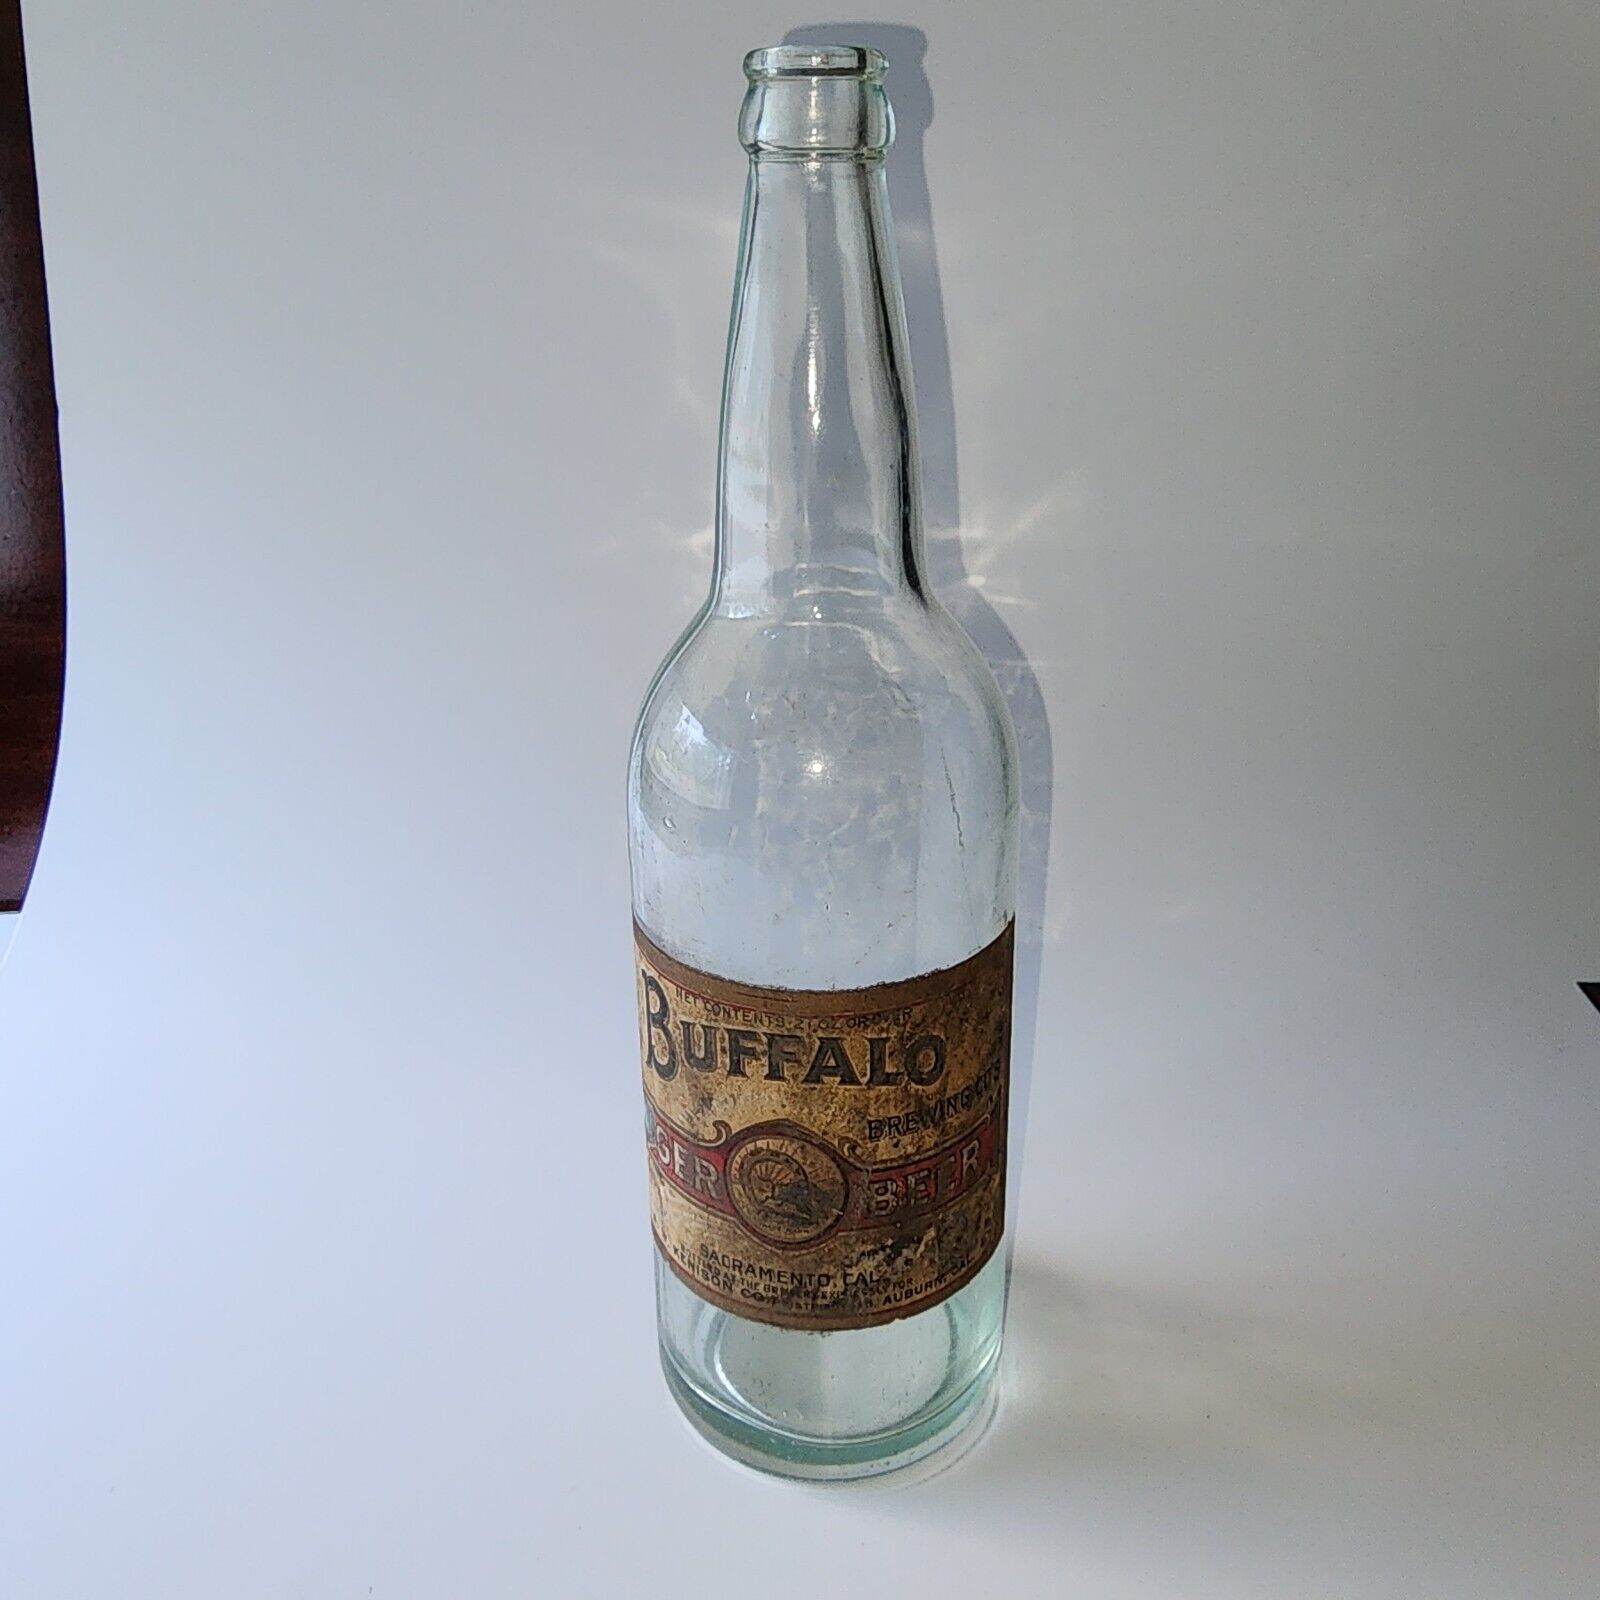 21 oz. Buffalo Brewery Co. Lager Beer Bottle W/ Label. Pre-Prohibition